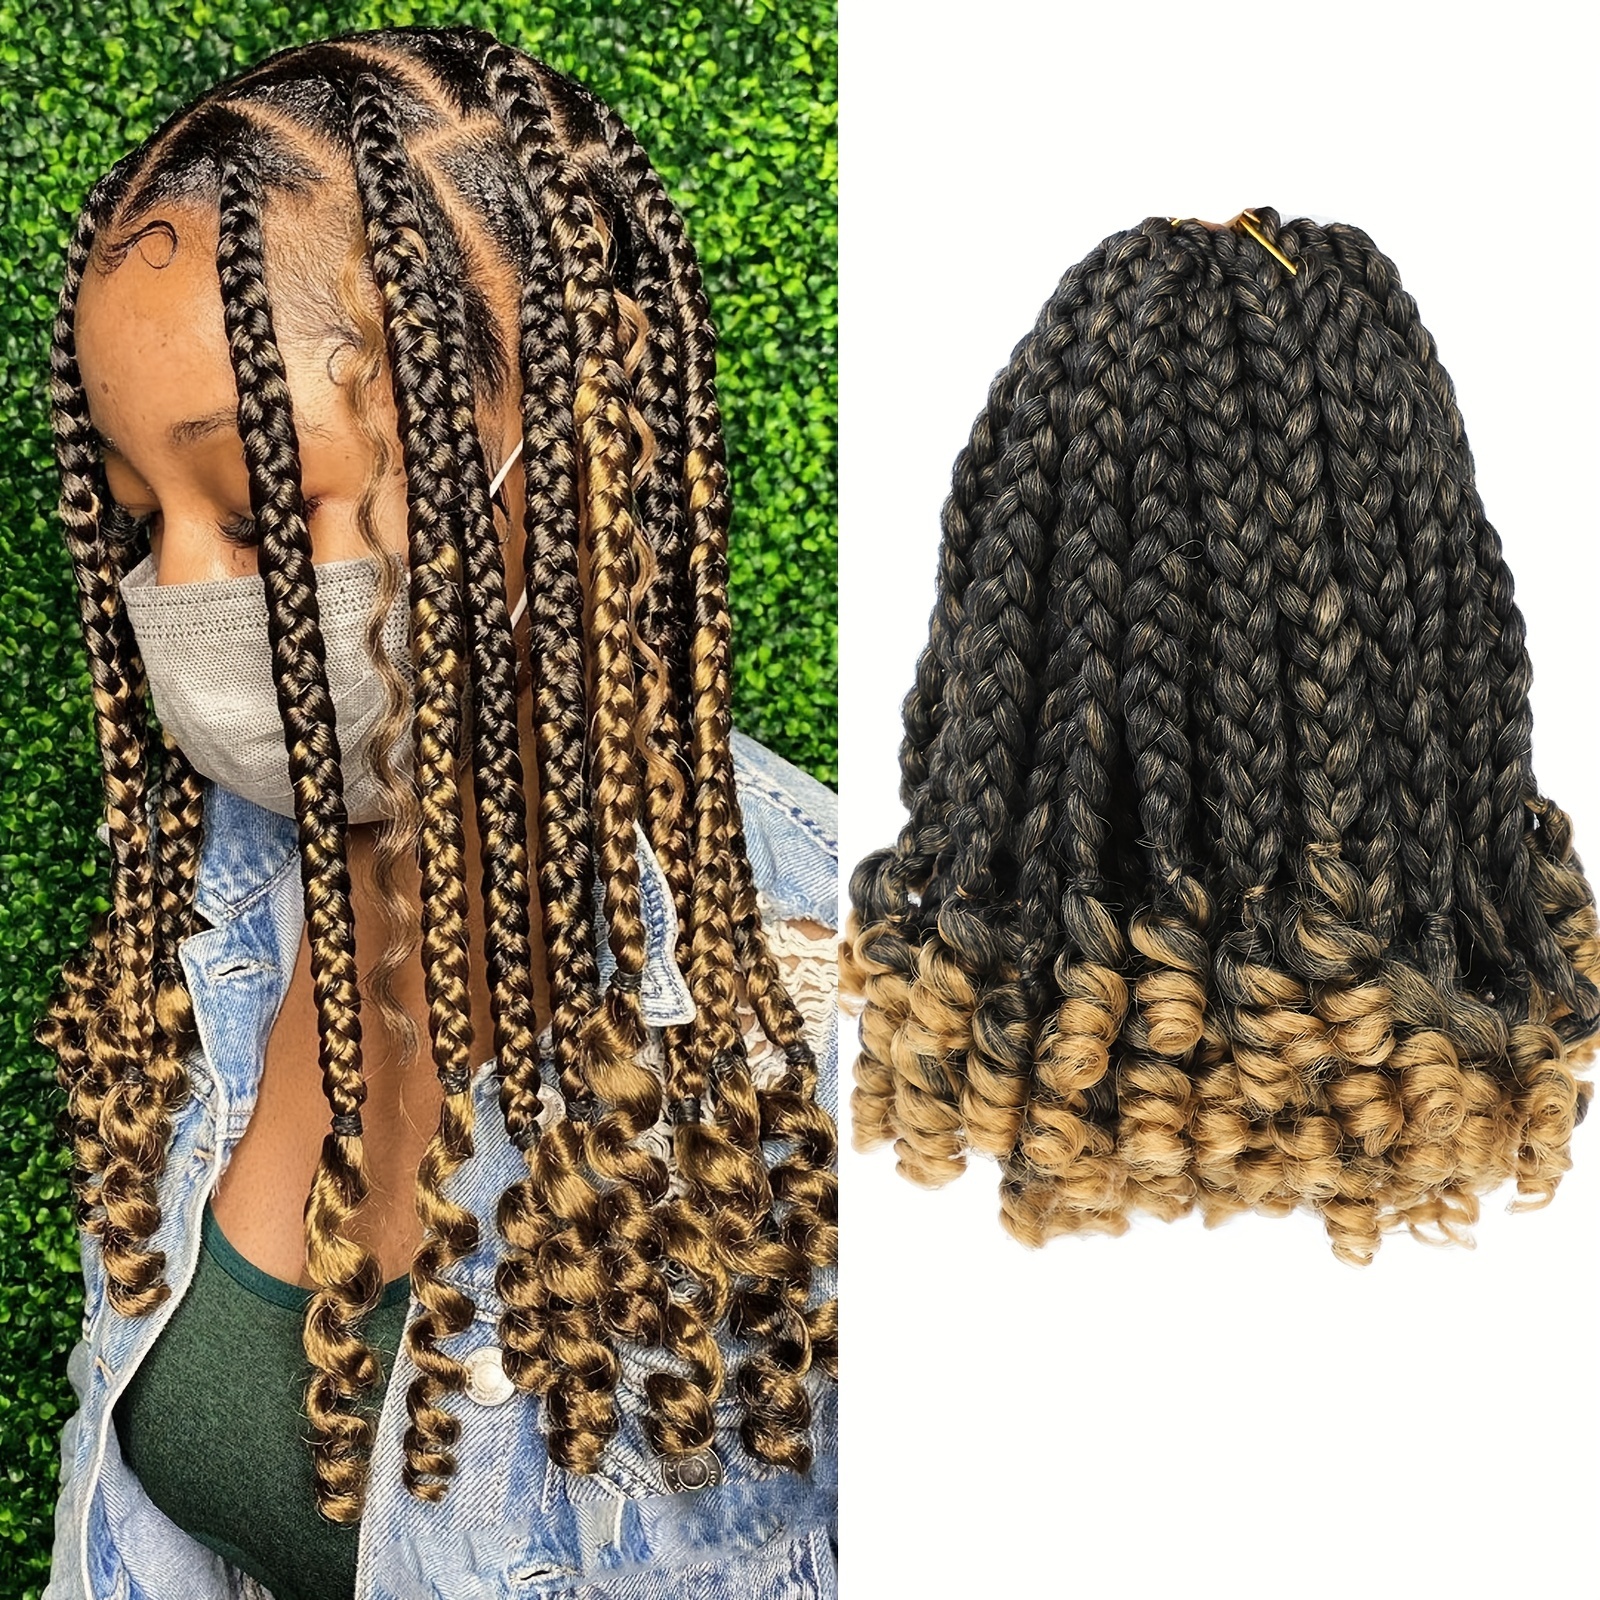 Feiboyy Fiber Crochet Hair With Three Braids Wrapped Around The Tail Box  Braids Curly Ends Horsetail Wig 